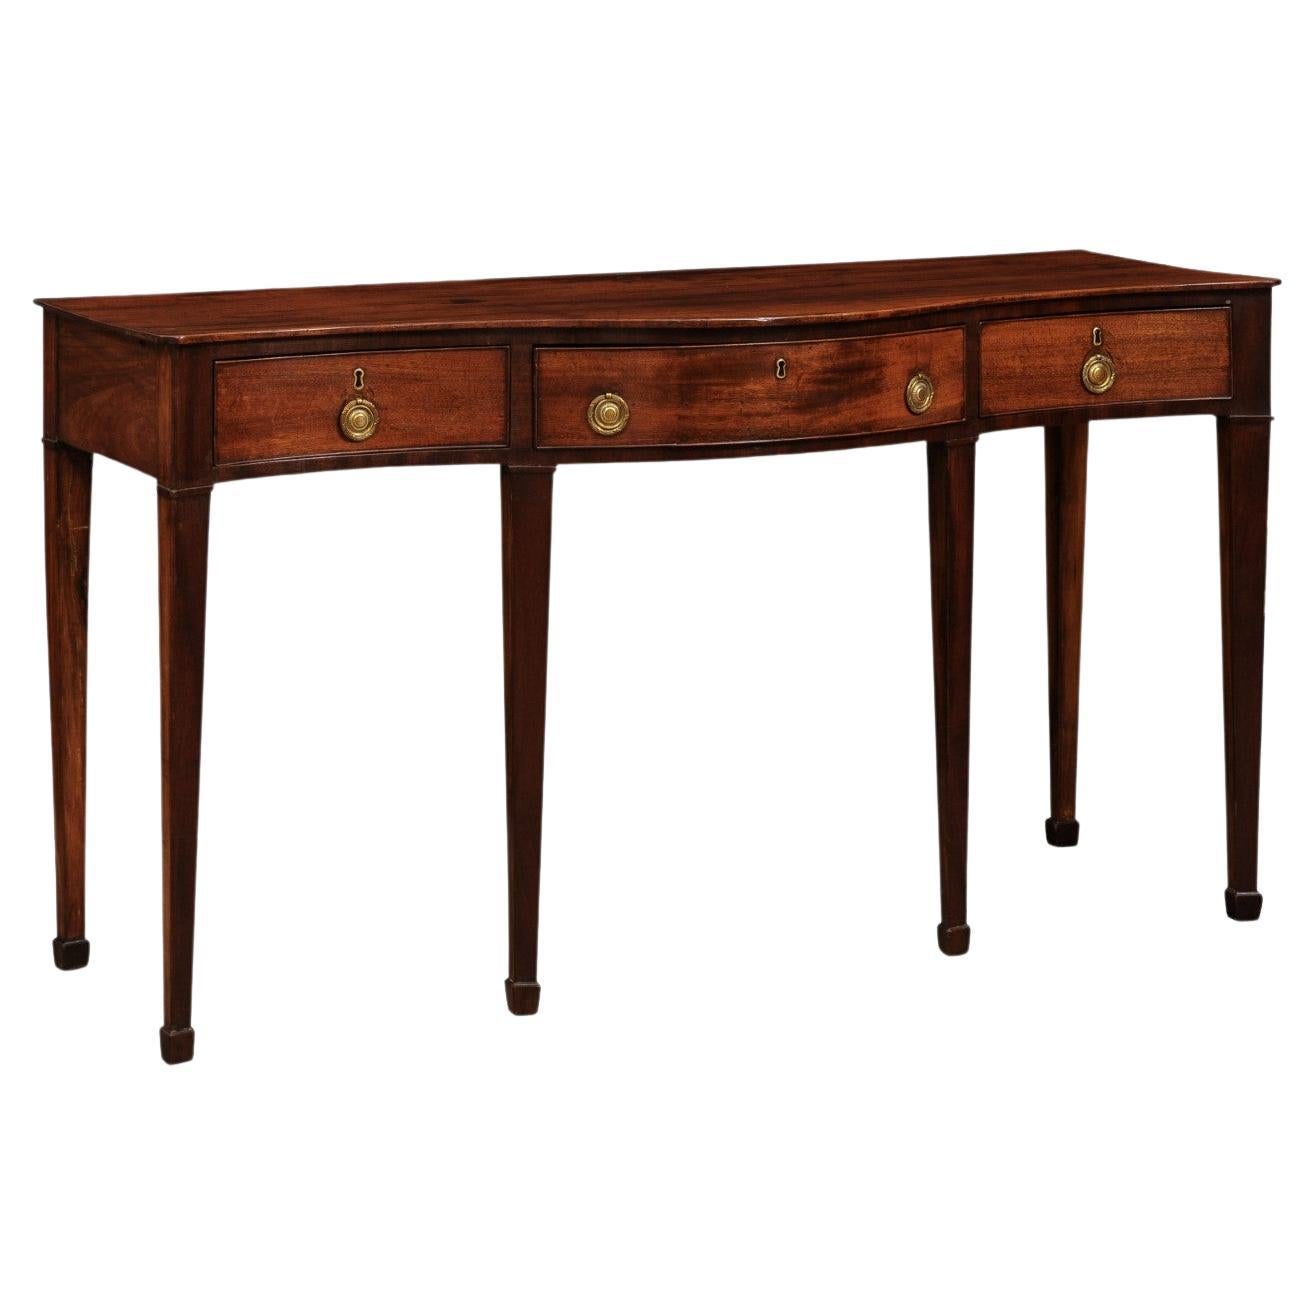 19th Century Mahogany Serving Serpentine Table with 3 Drawers